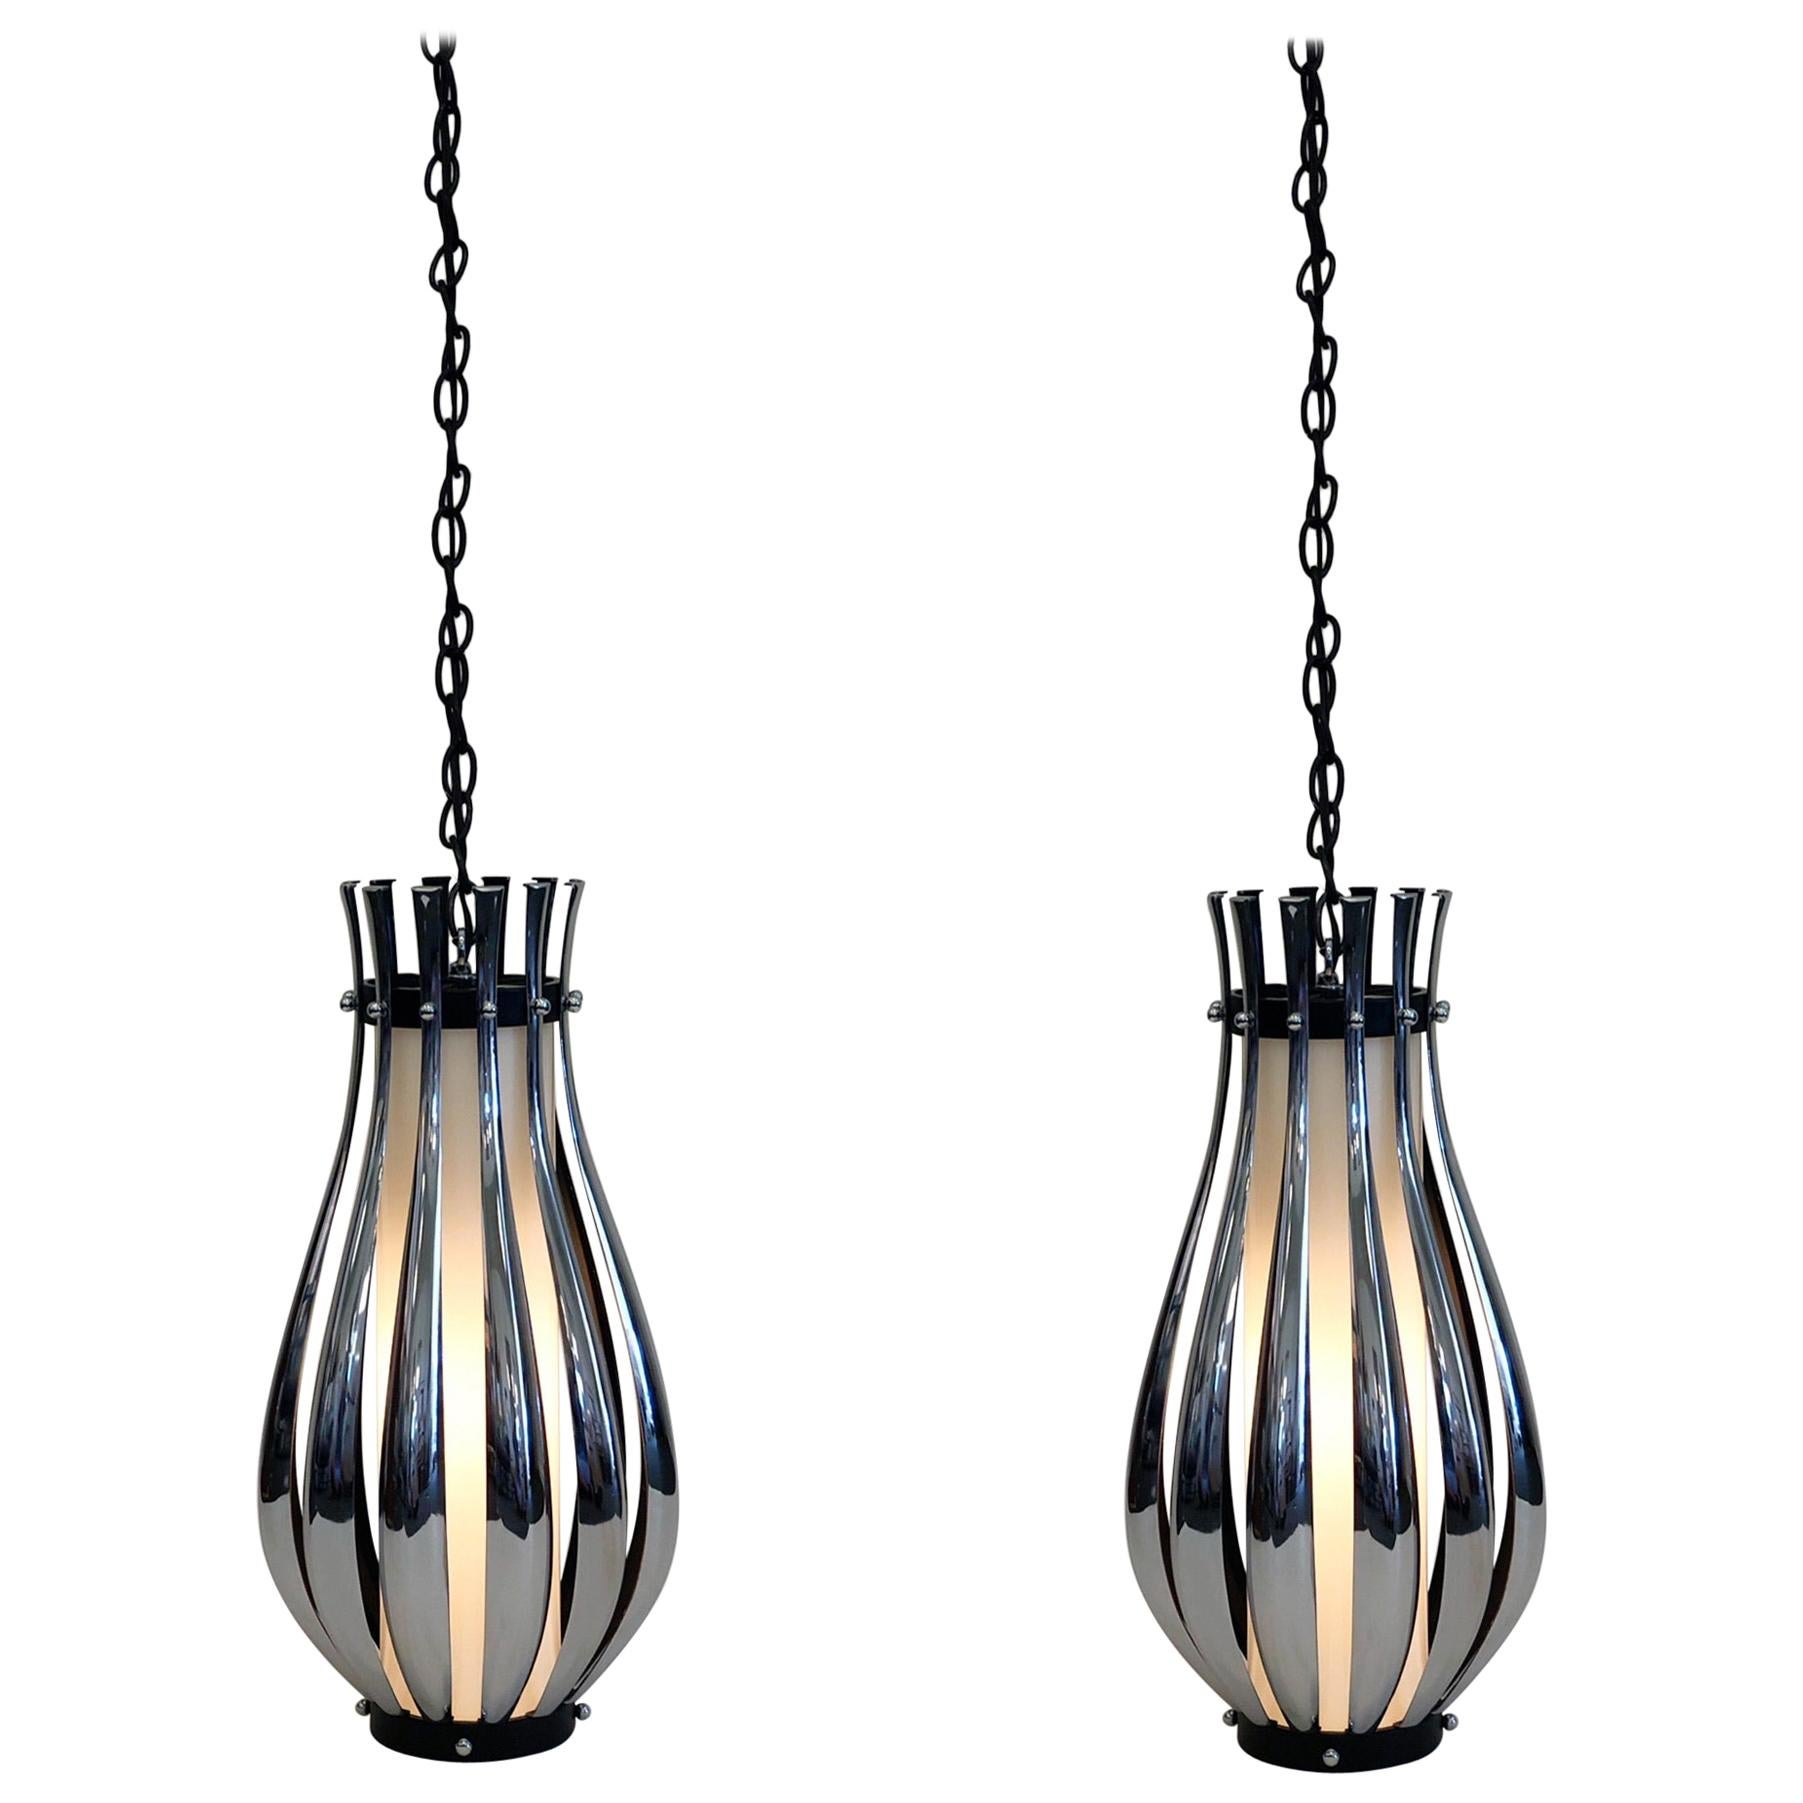 Pair of Chrome and White Glass Pendant Lamps by Sonneman For Sale